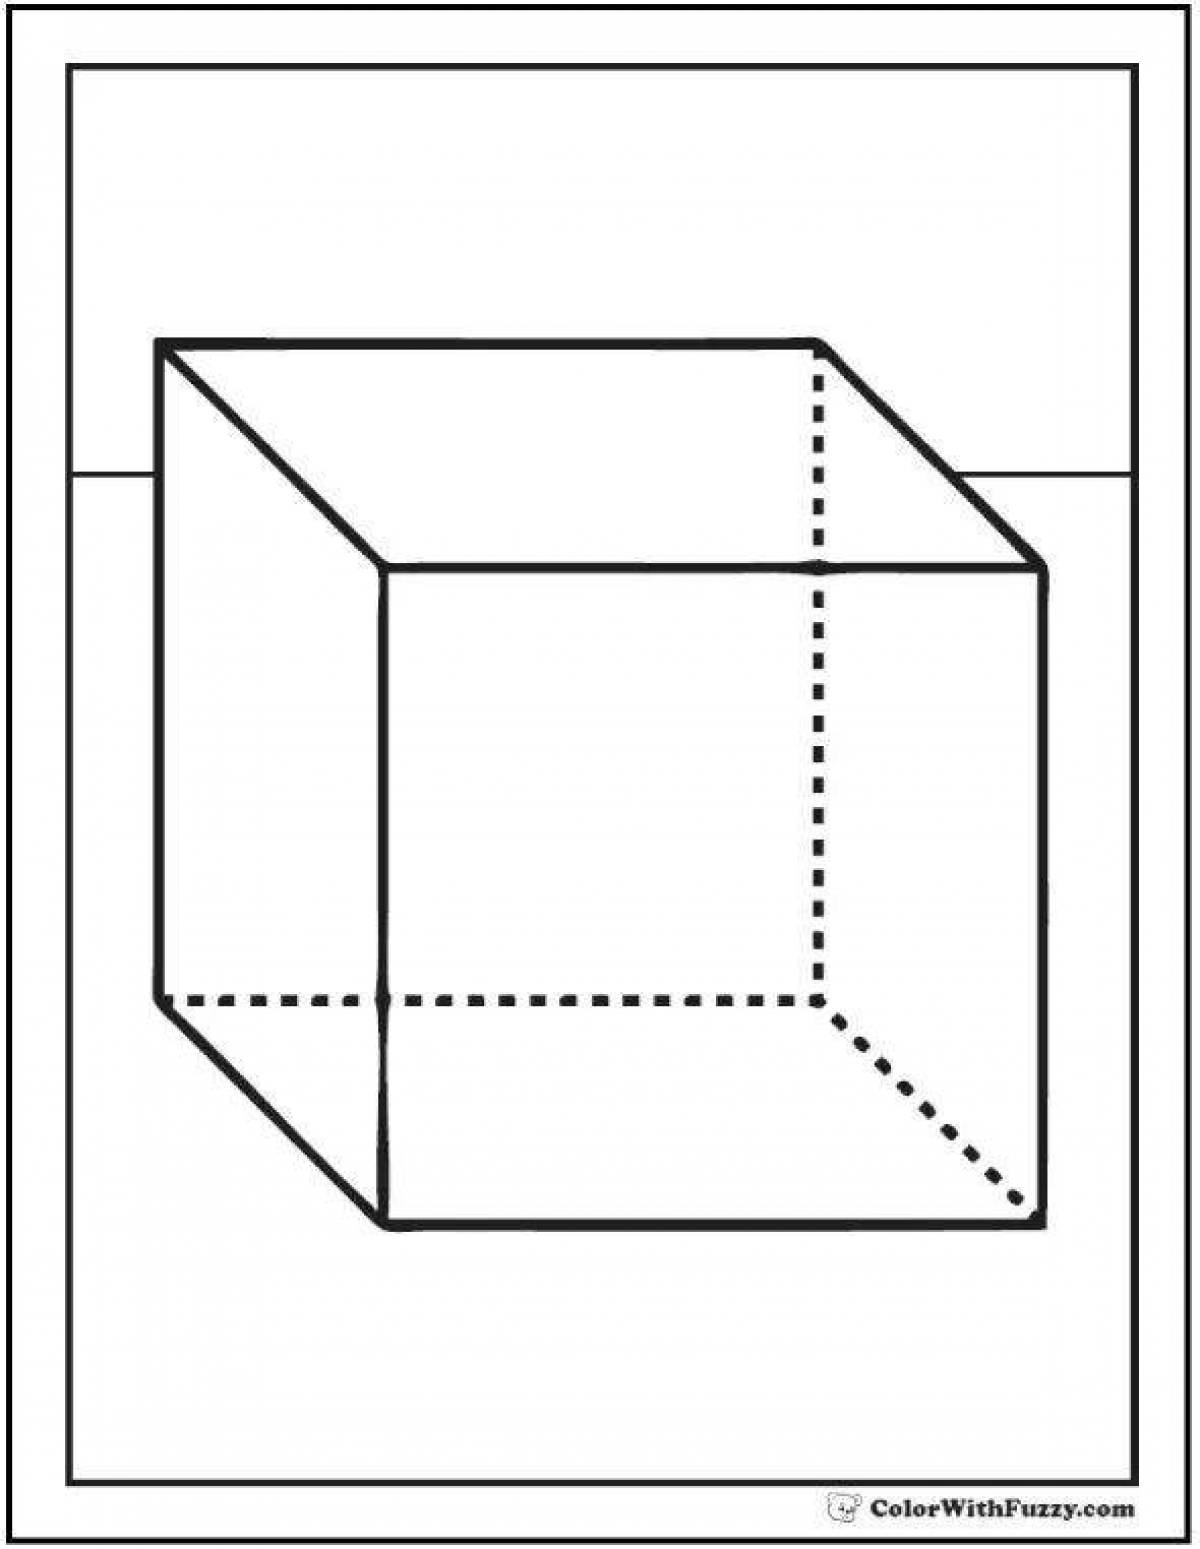 Attractive cube coloring page